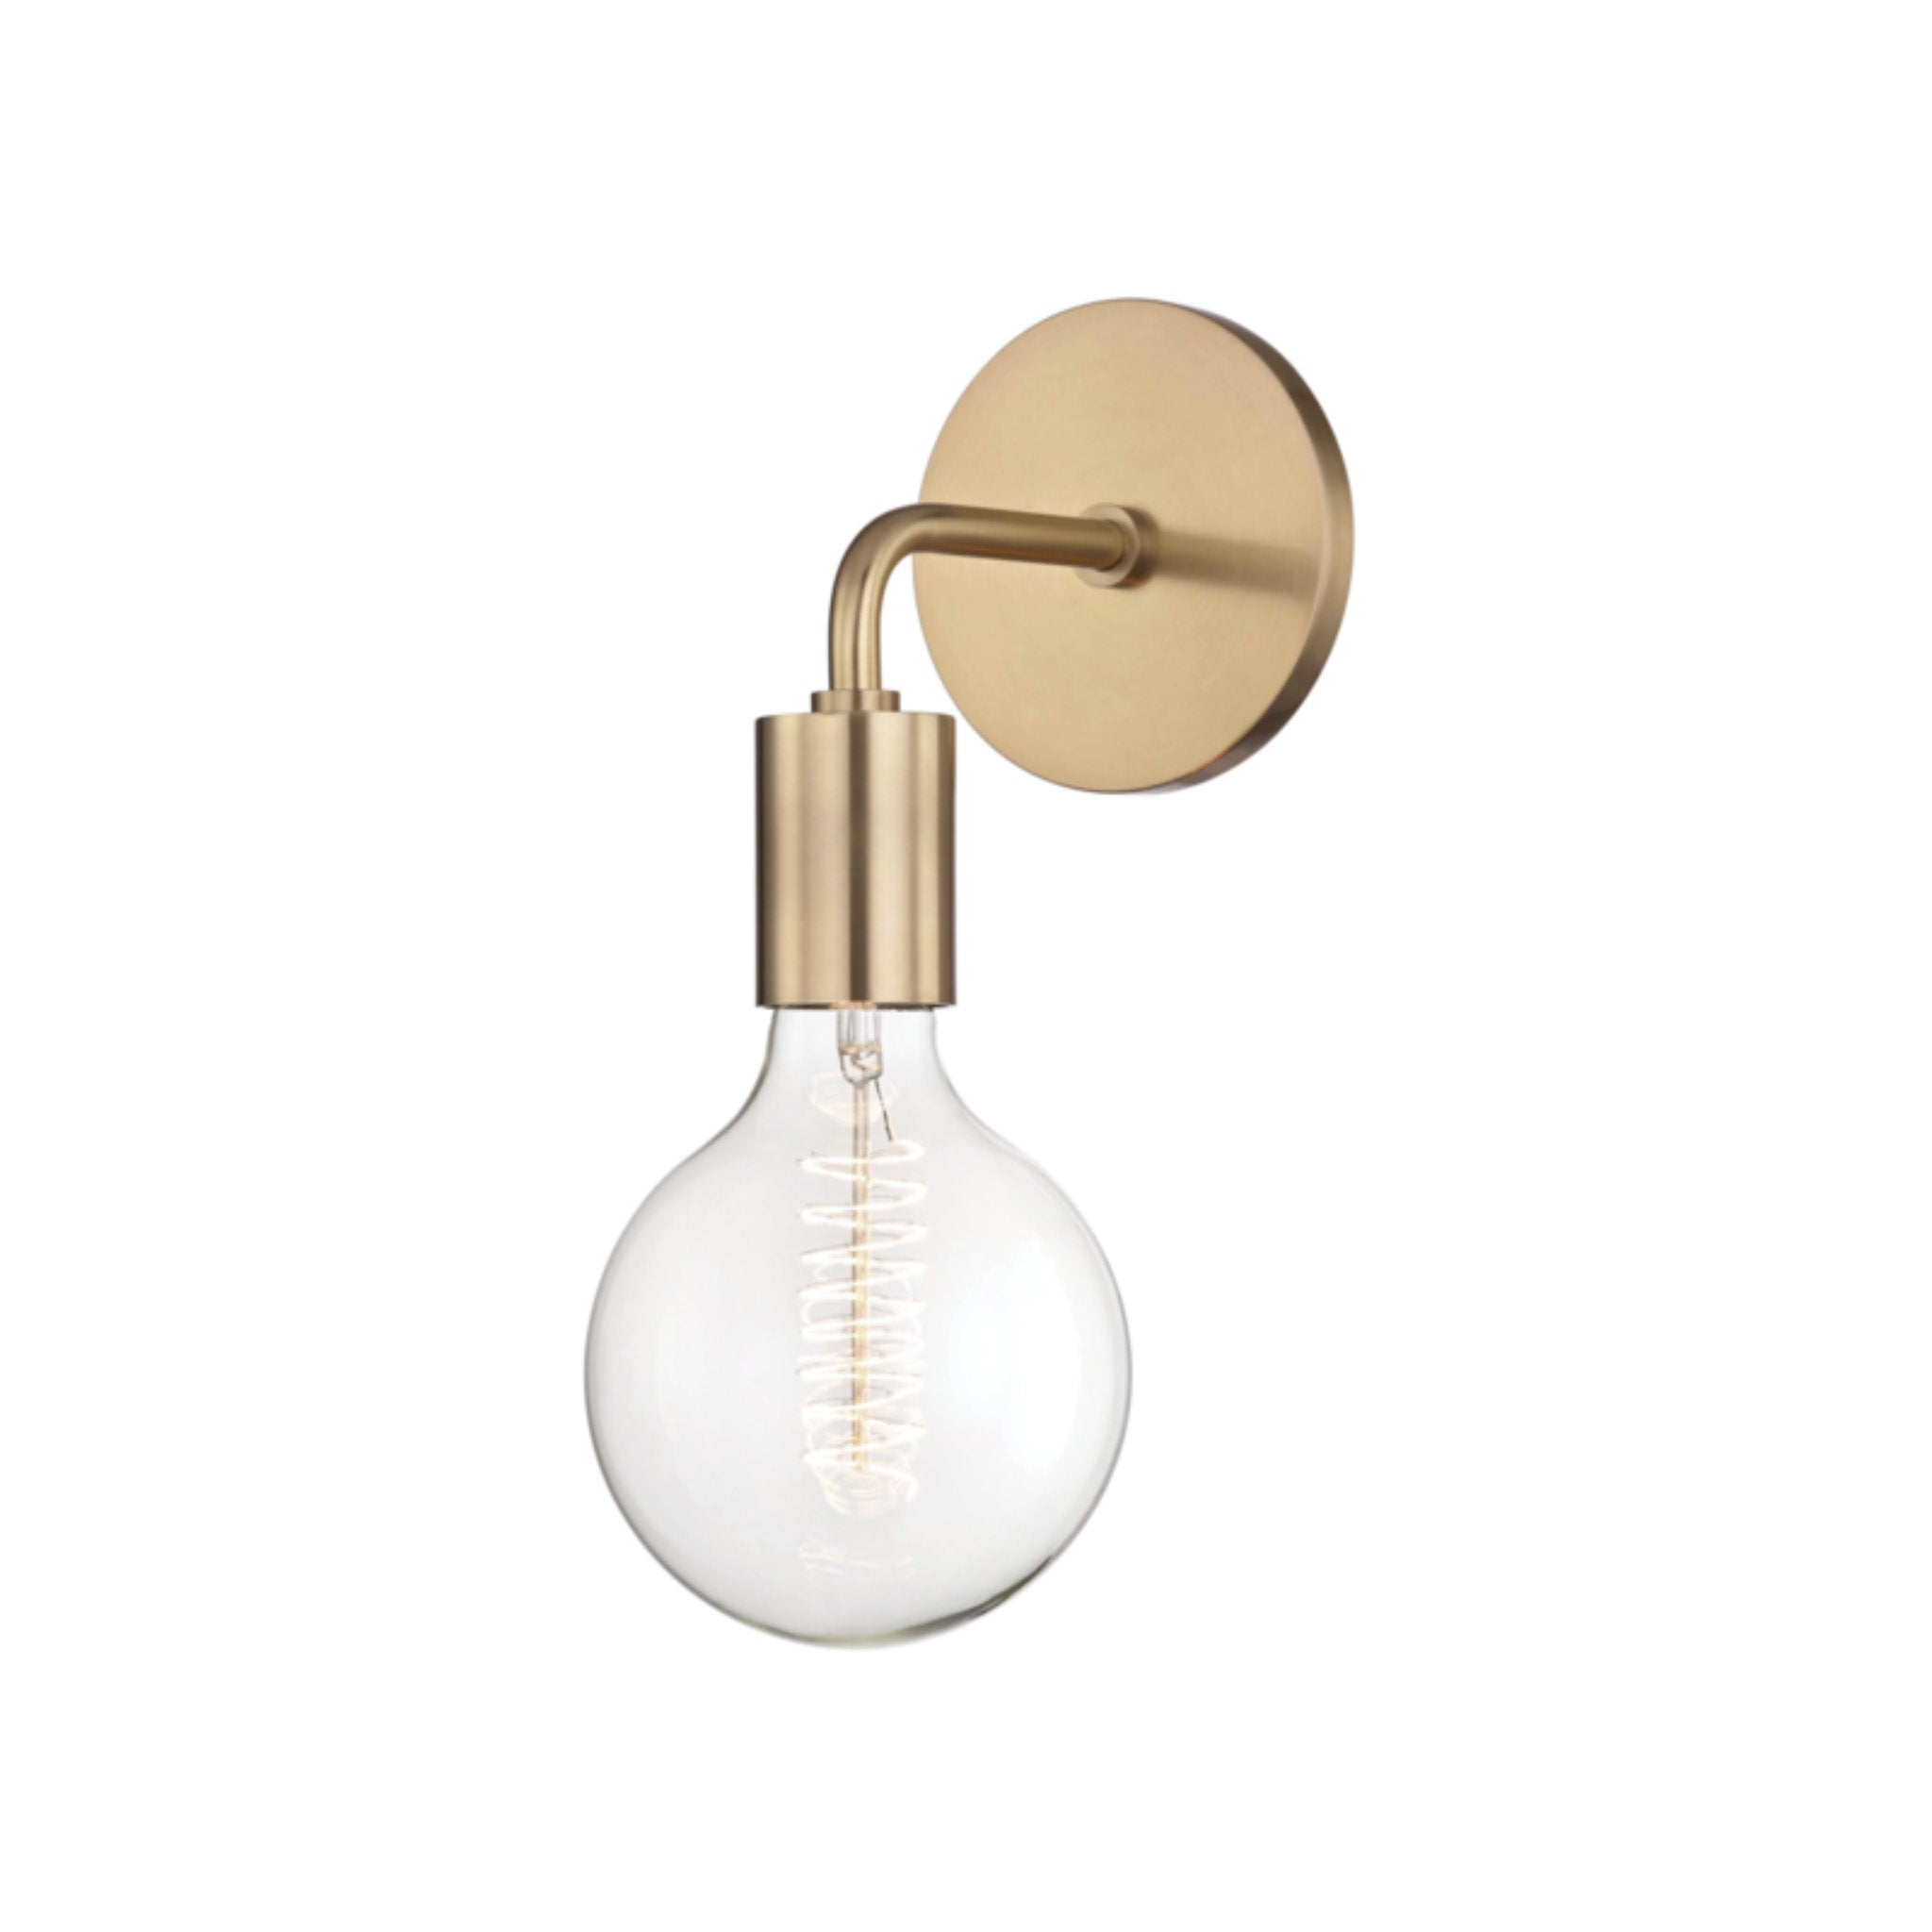 Ava 1-Light Wall Sconce in Aged Brass